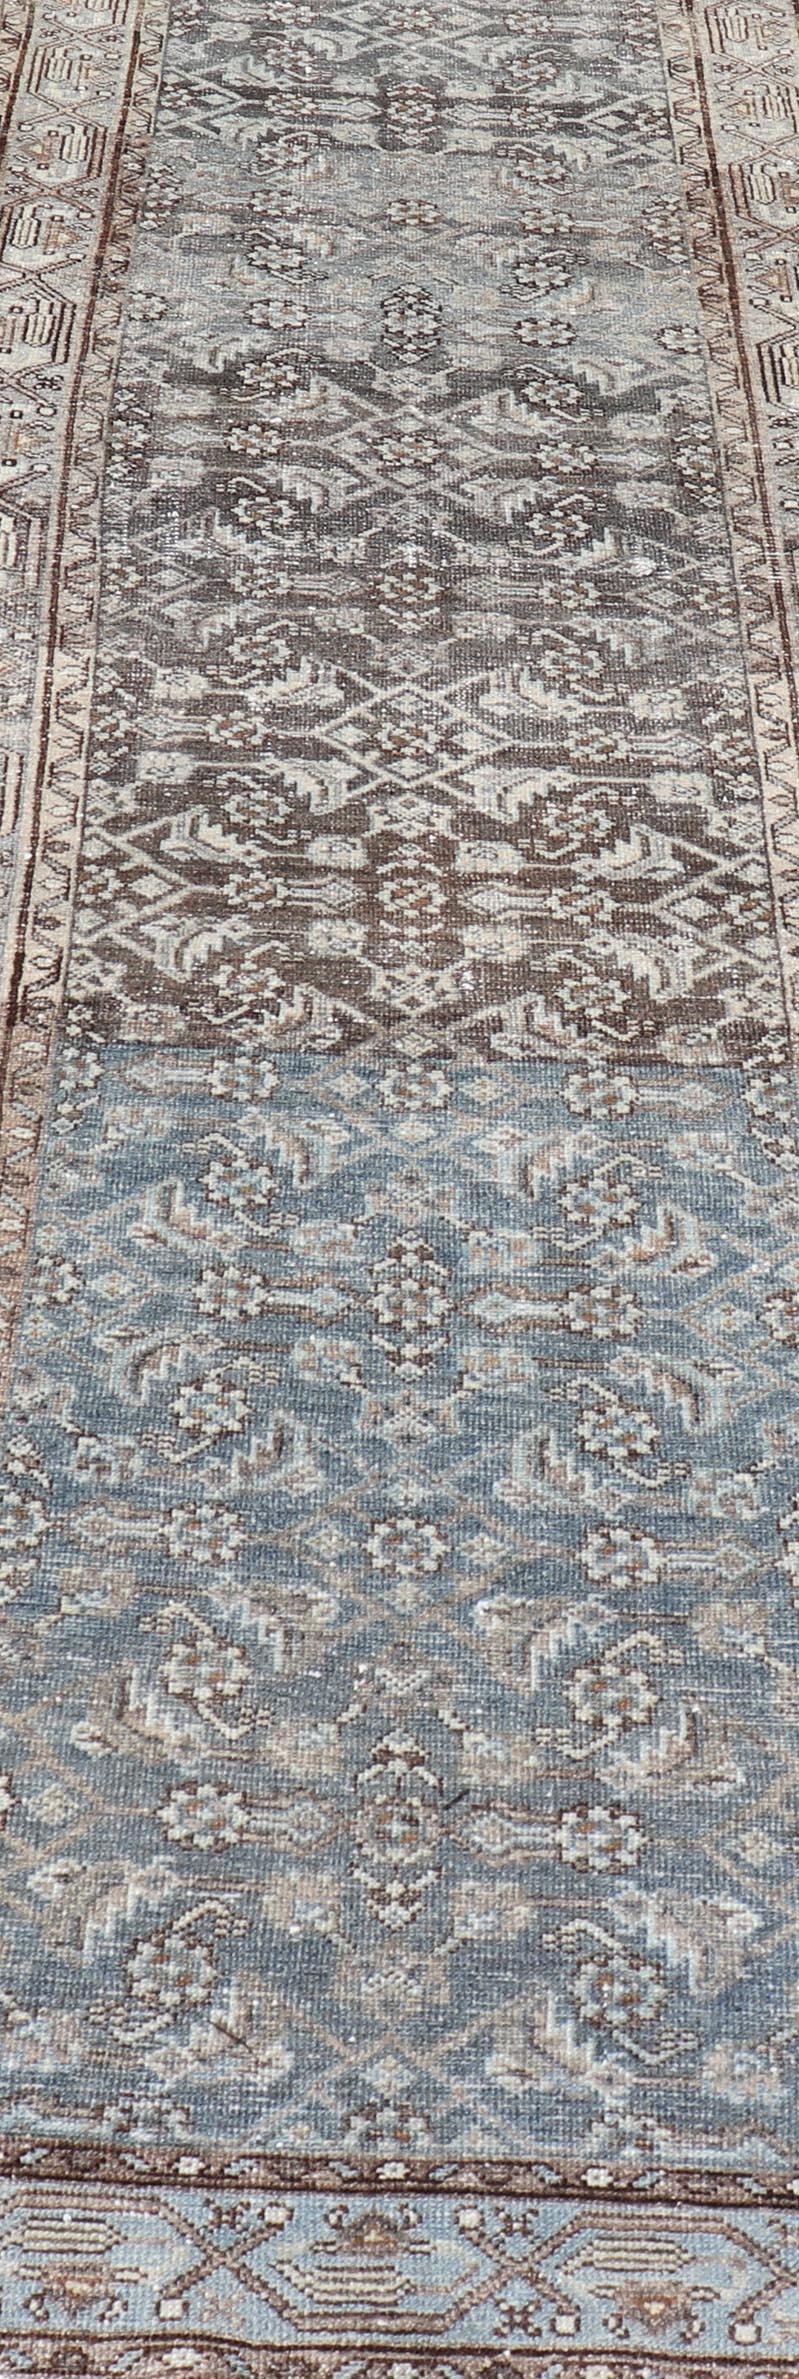 Antique Persian Hamadan Runner in Wool with All-Over Floral Design For Sale 4